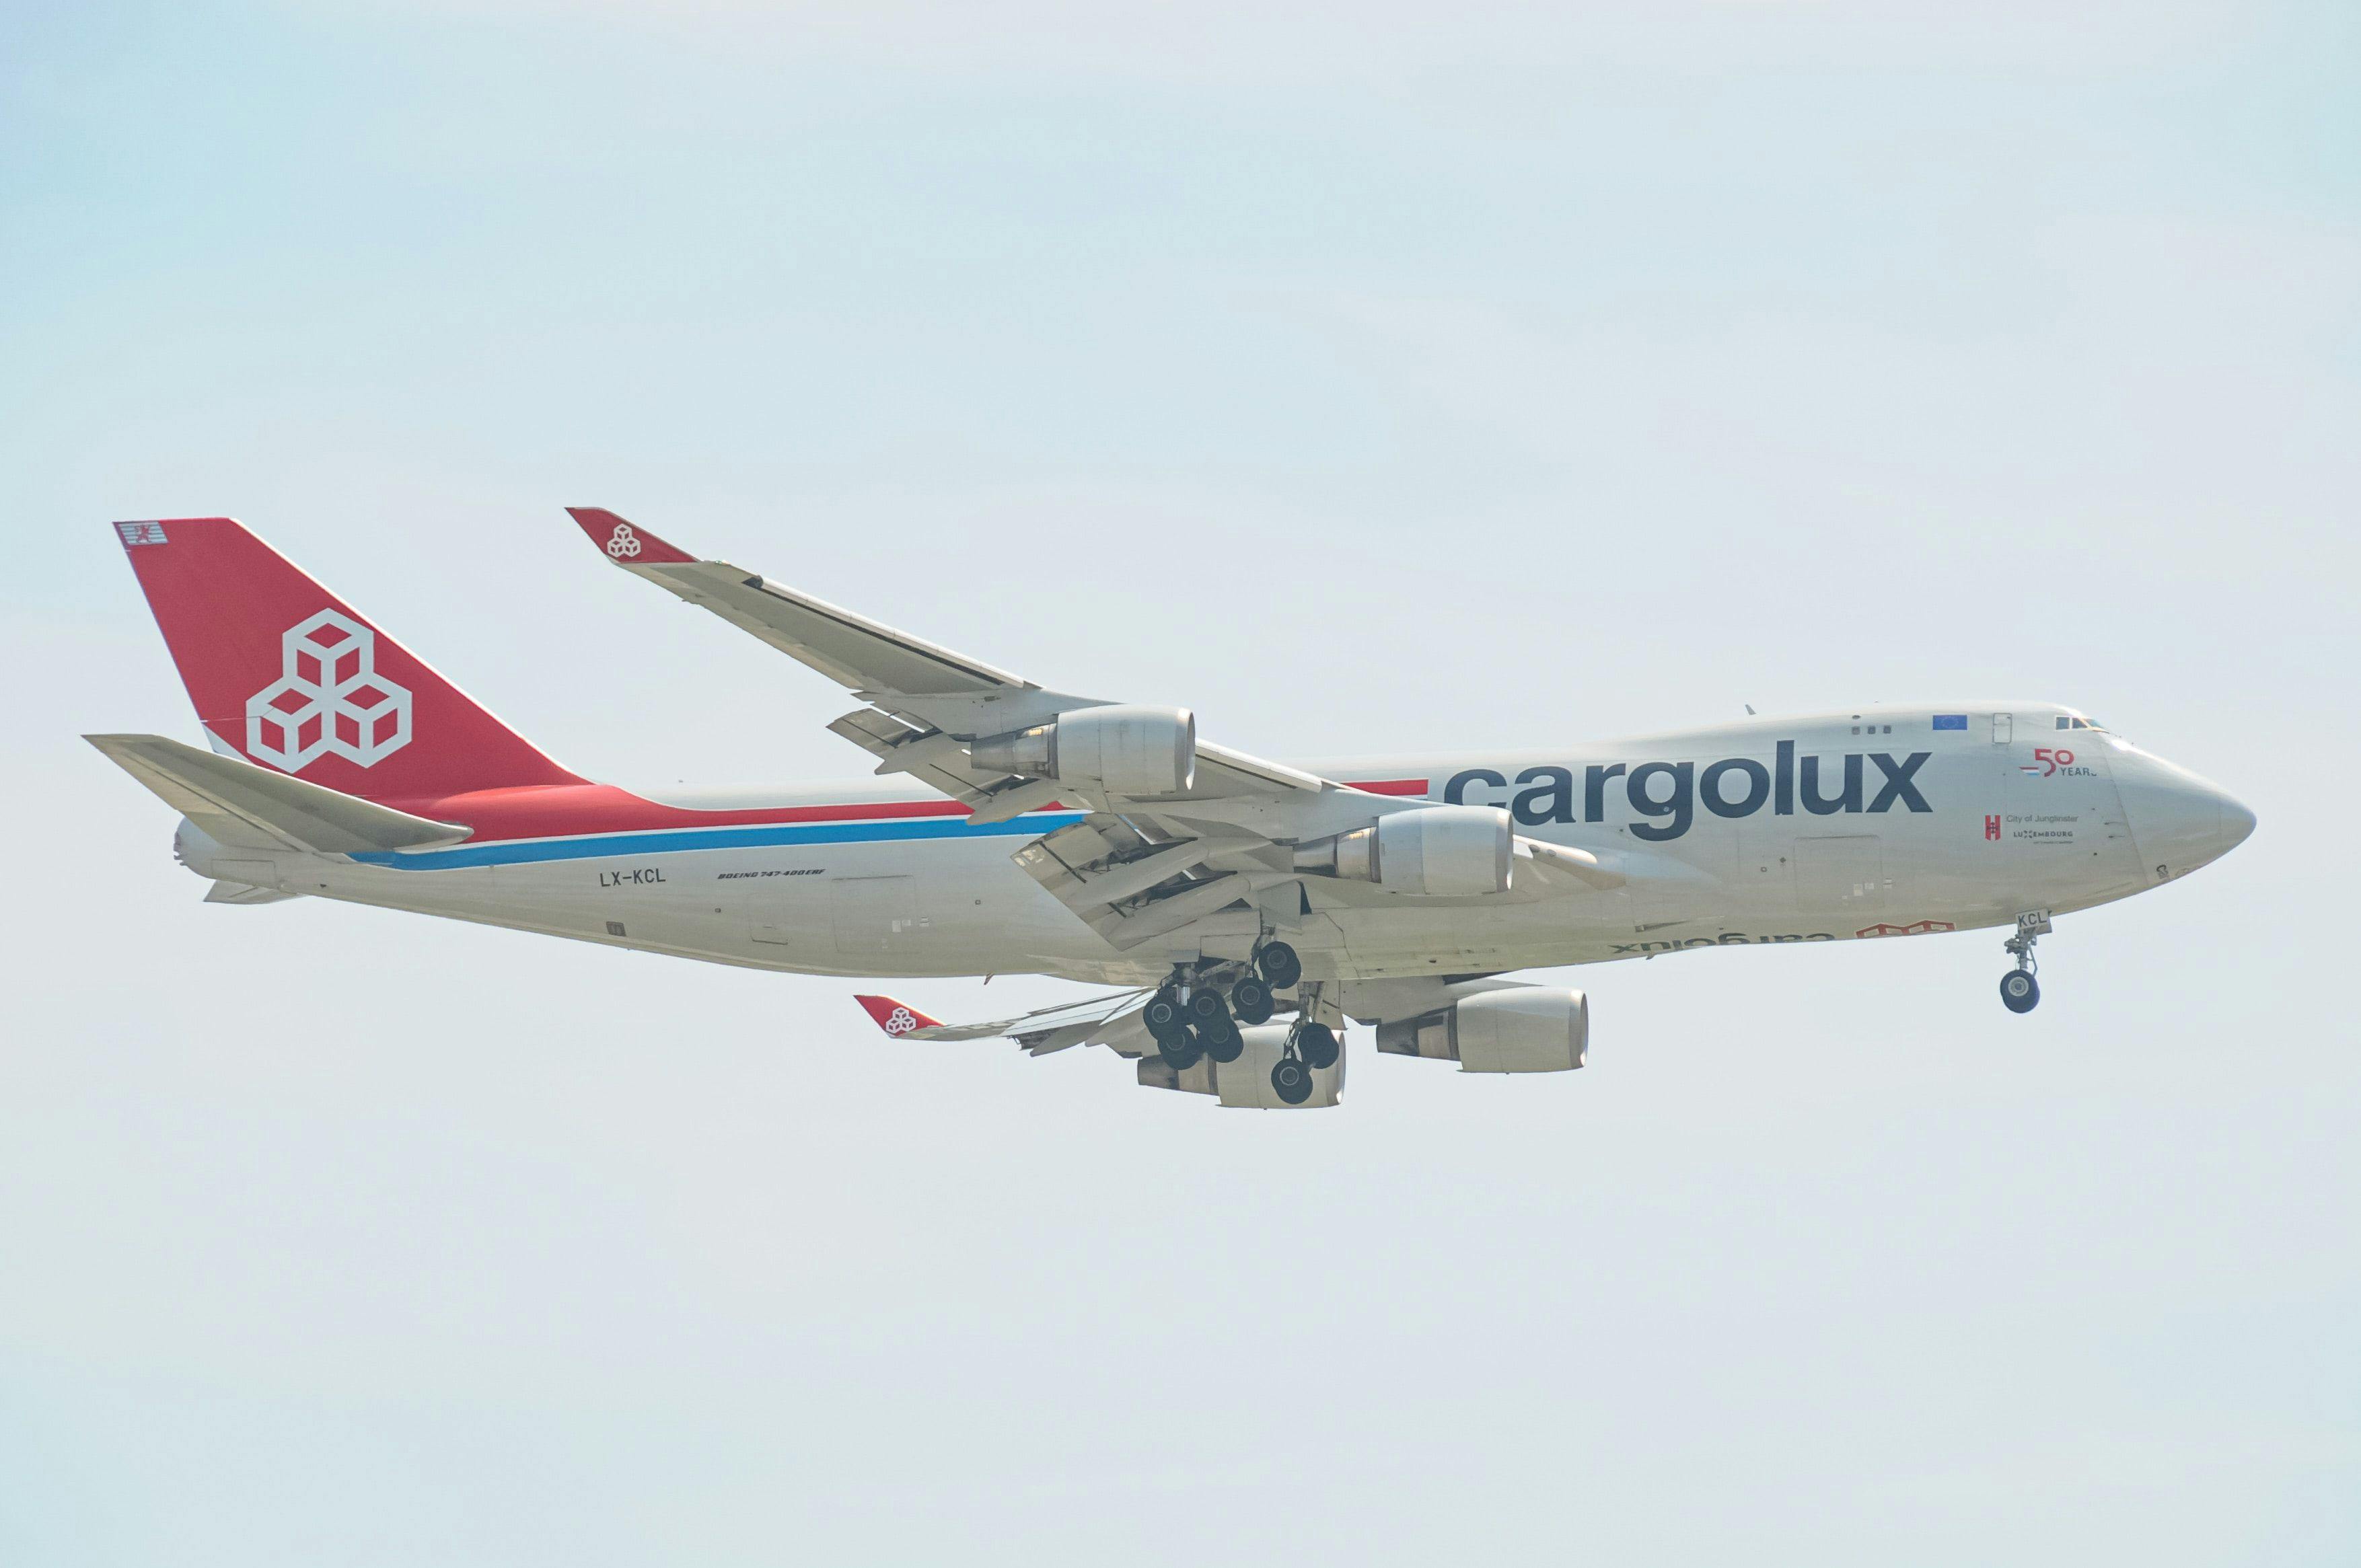 Cargolux strike: how it threatens Luxembourg's air traffic